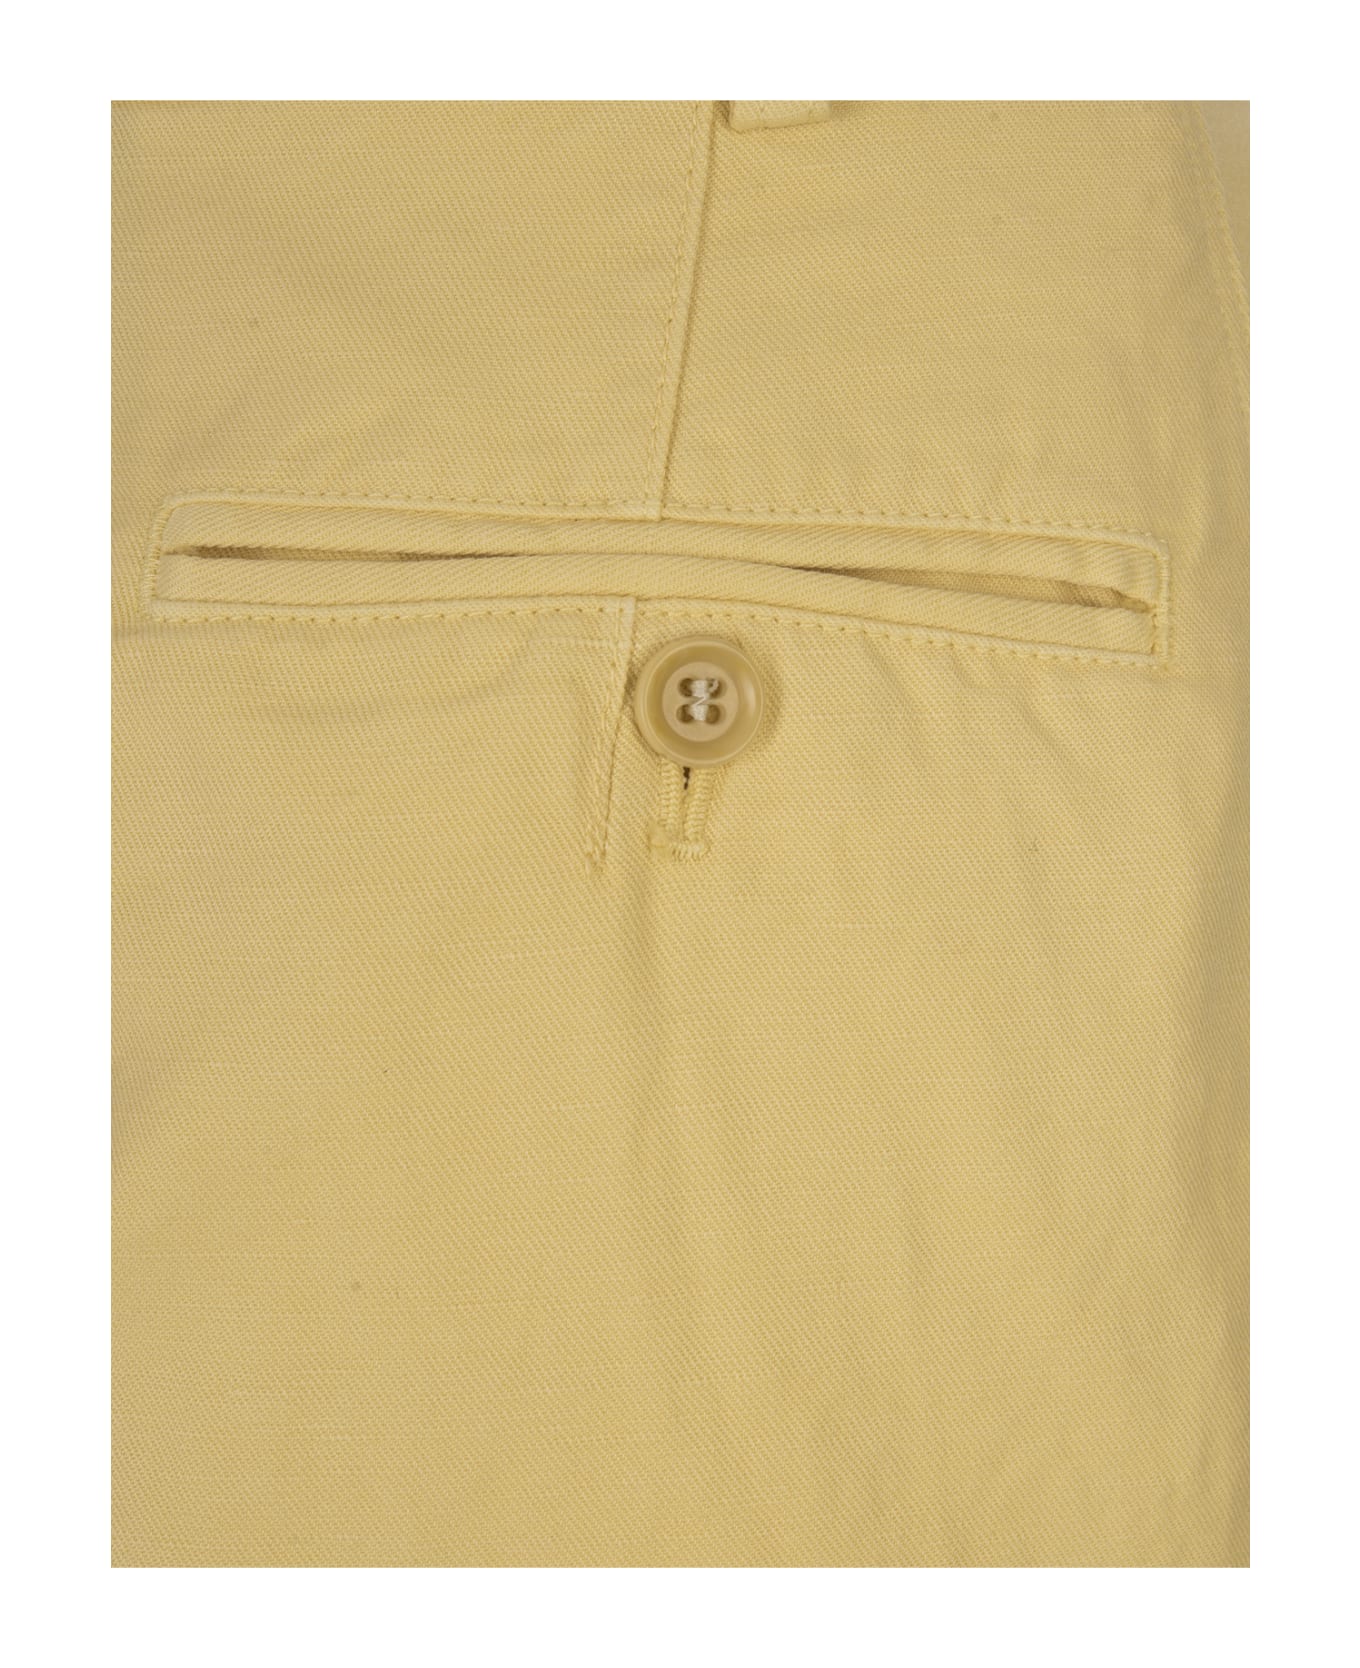 Aspesi Ginger Linen And Cotton Palazzo Trousers - Yellow